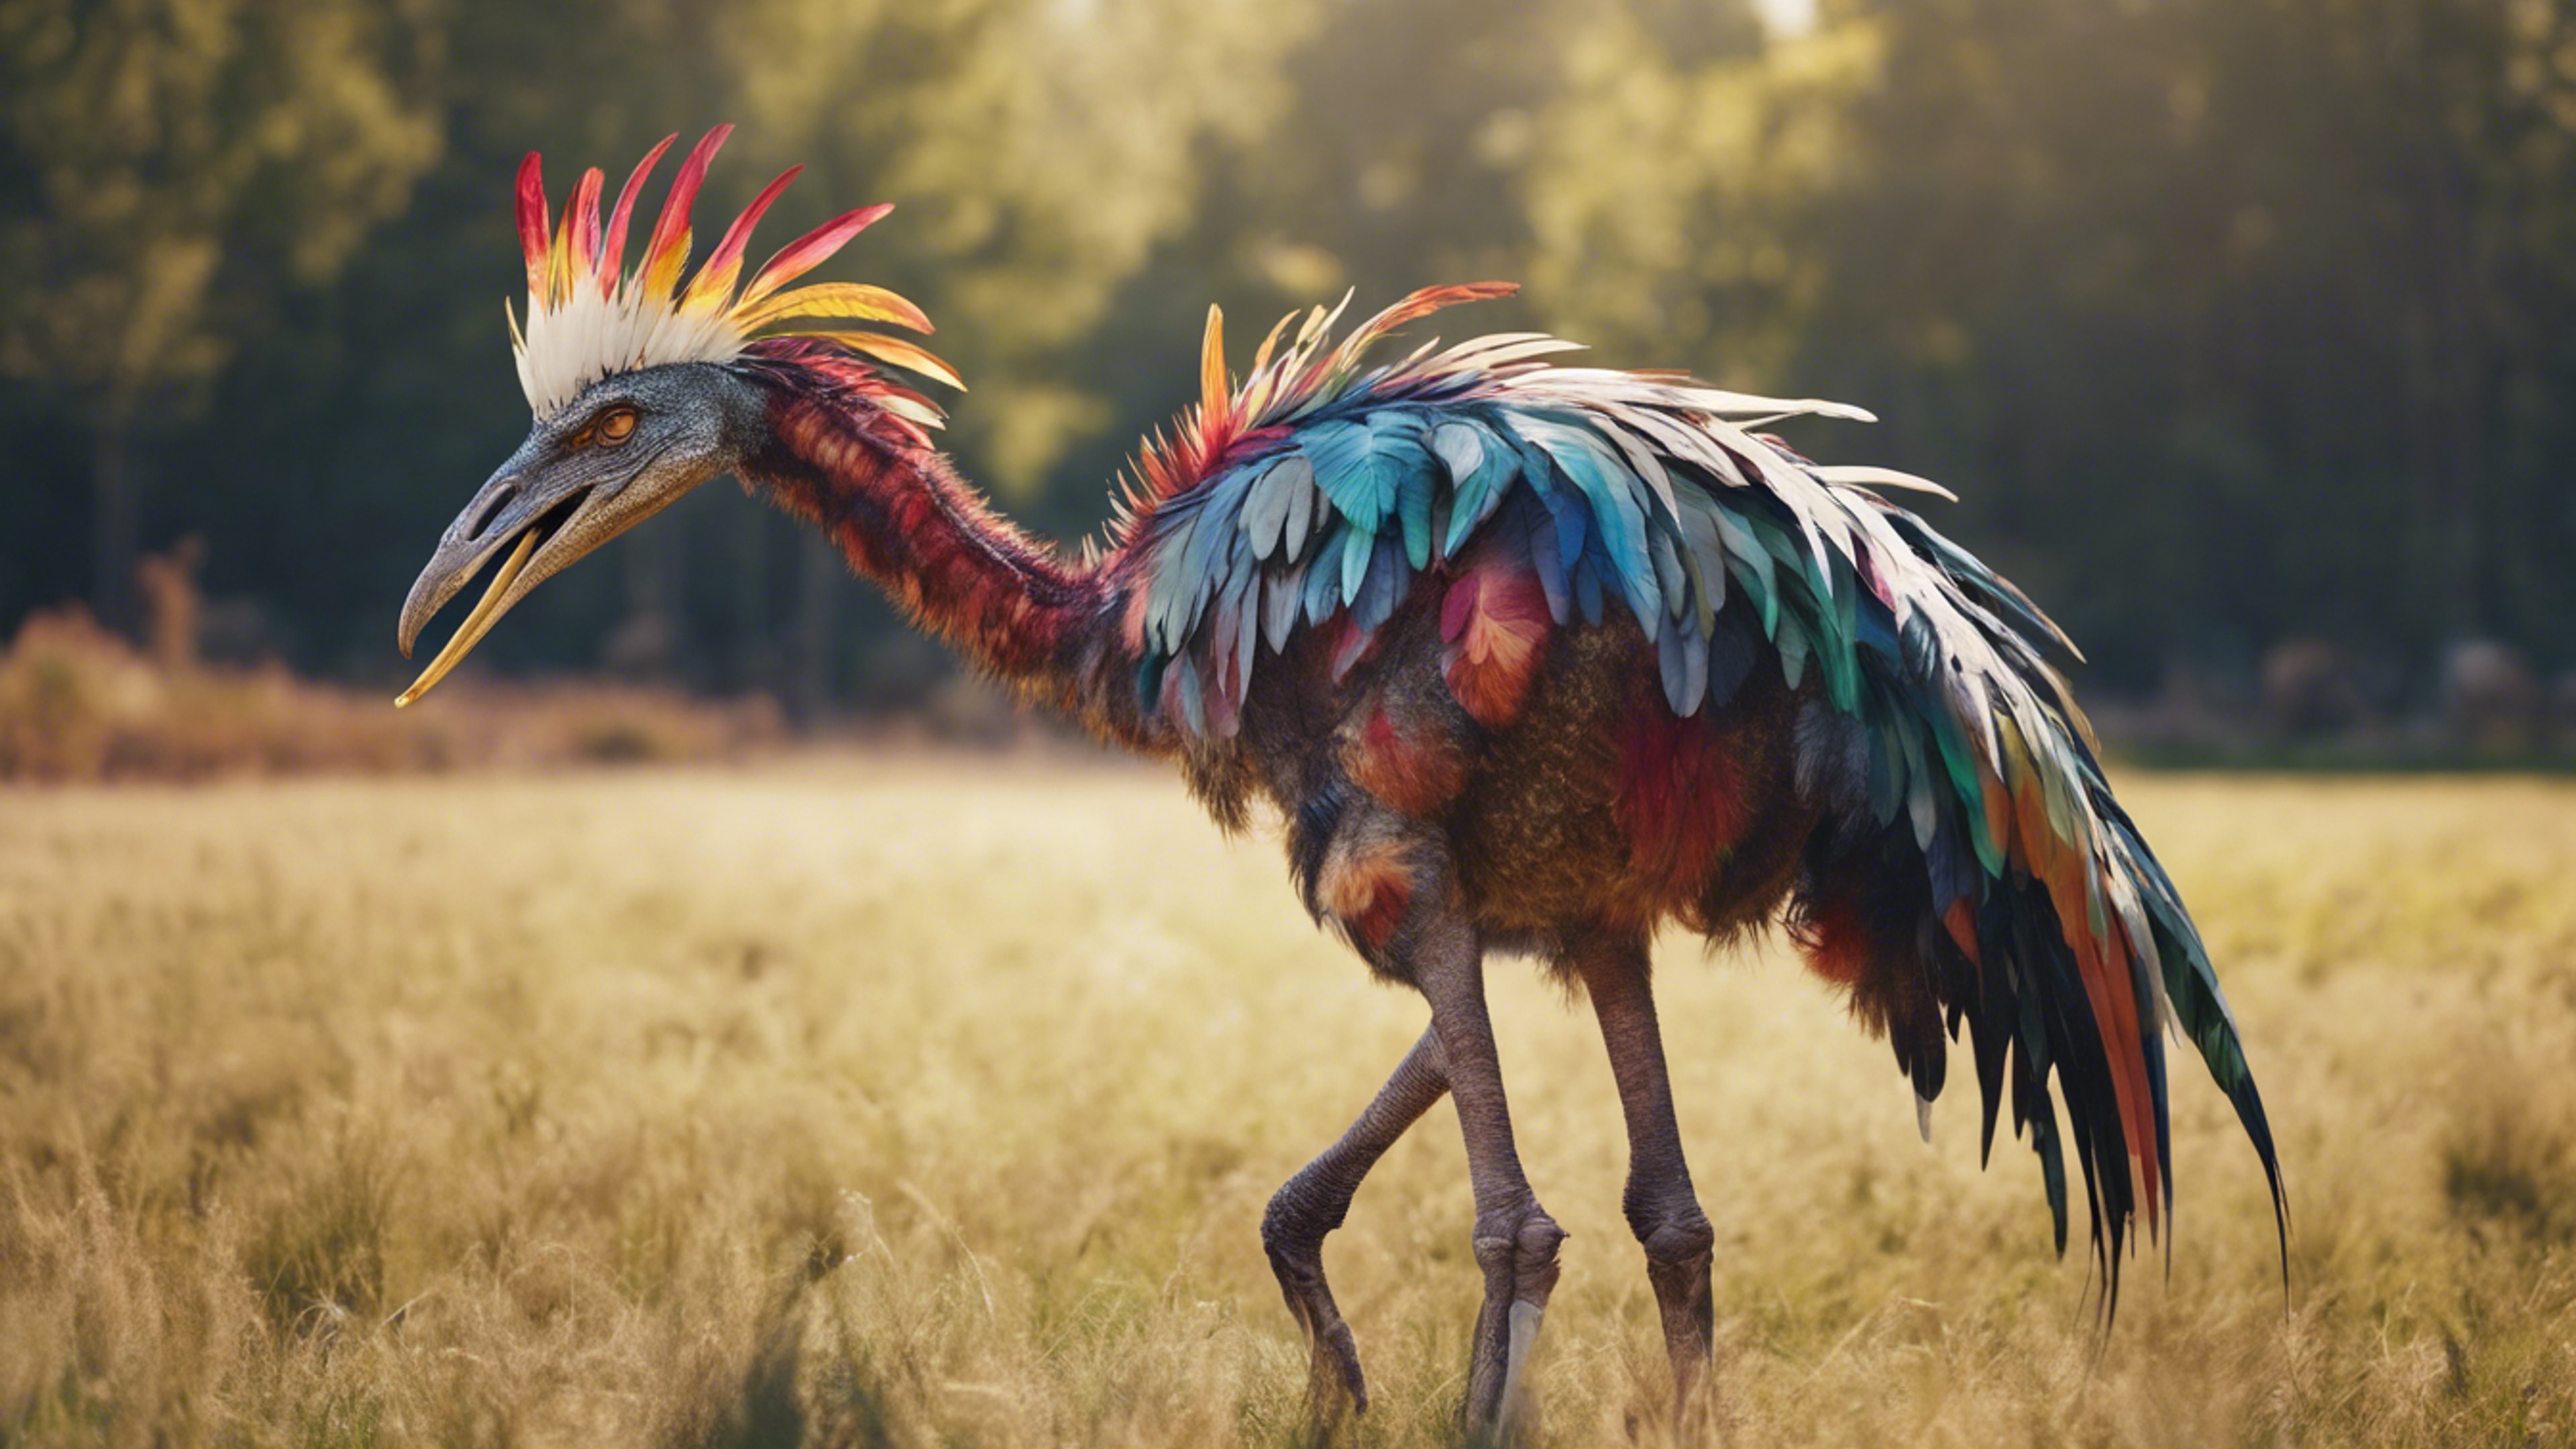 A Struthiomimus with colorful feathers prancing around in an open meadow. Tapet[bbeb240df8e5485aba58]